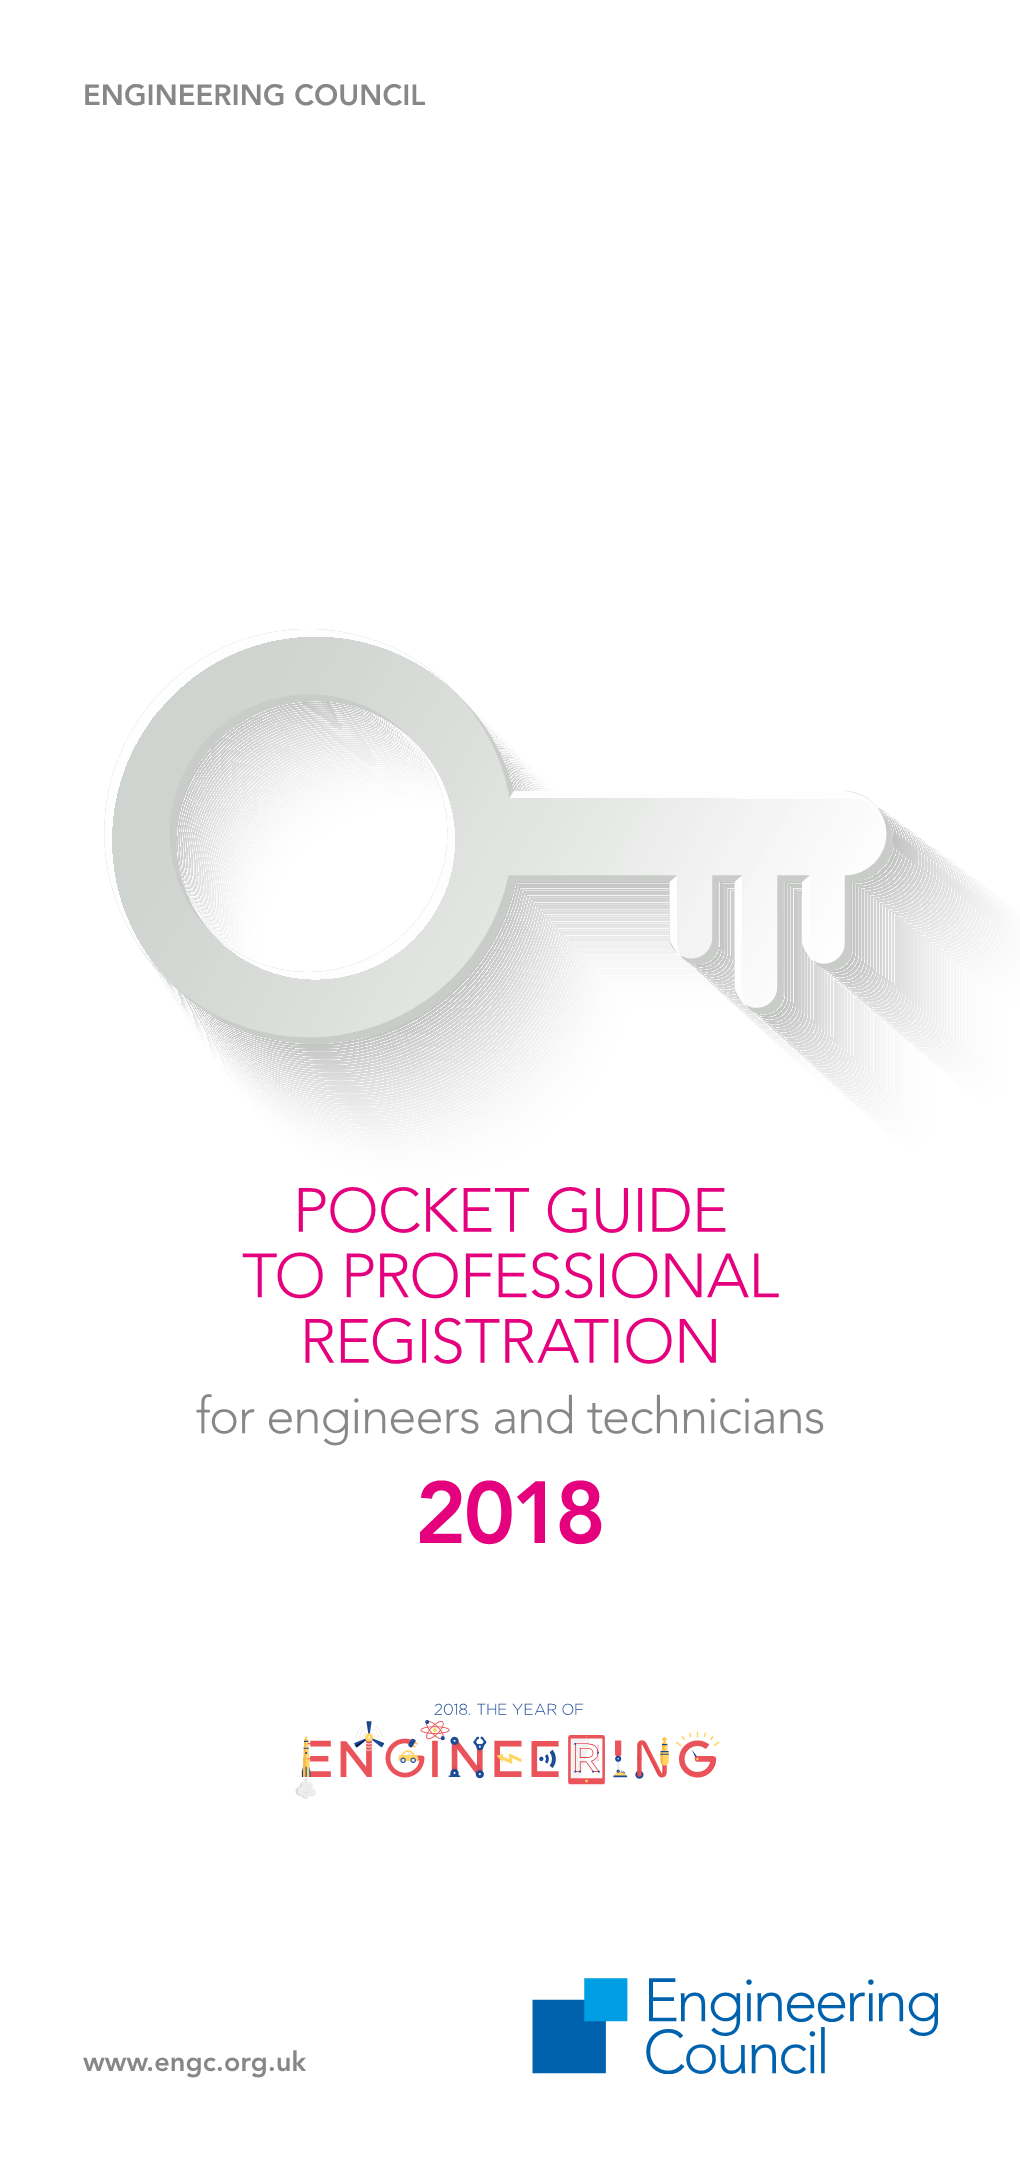 POCKET GUIDE to PROFESSIONAL REGISTRATION for Engineers and Technicians 2018